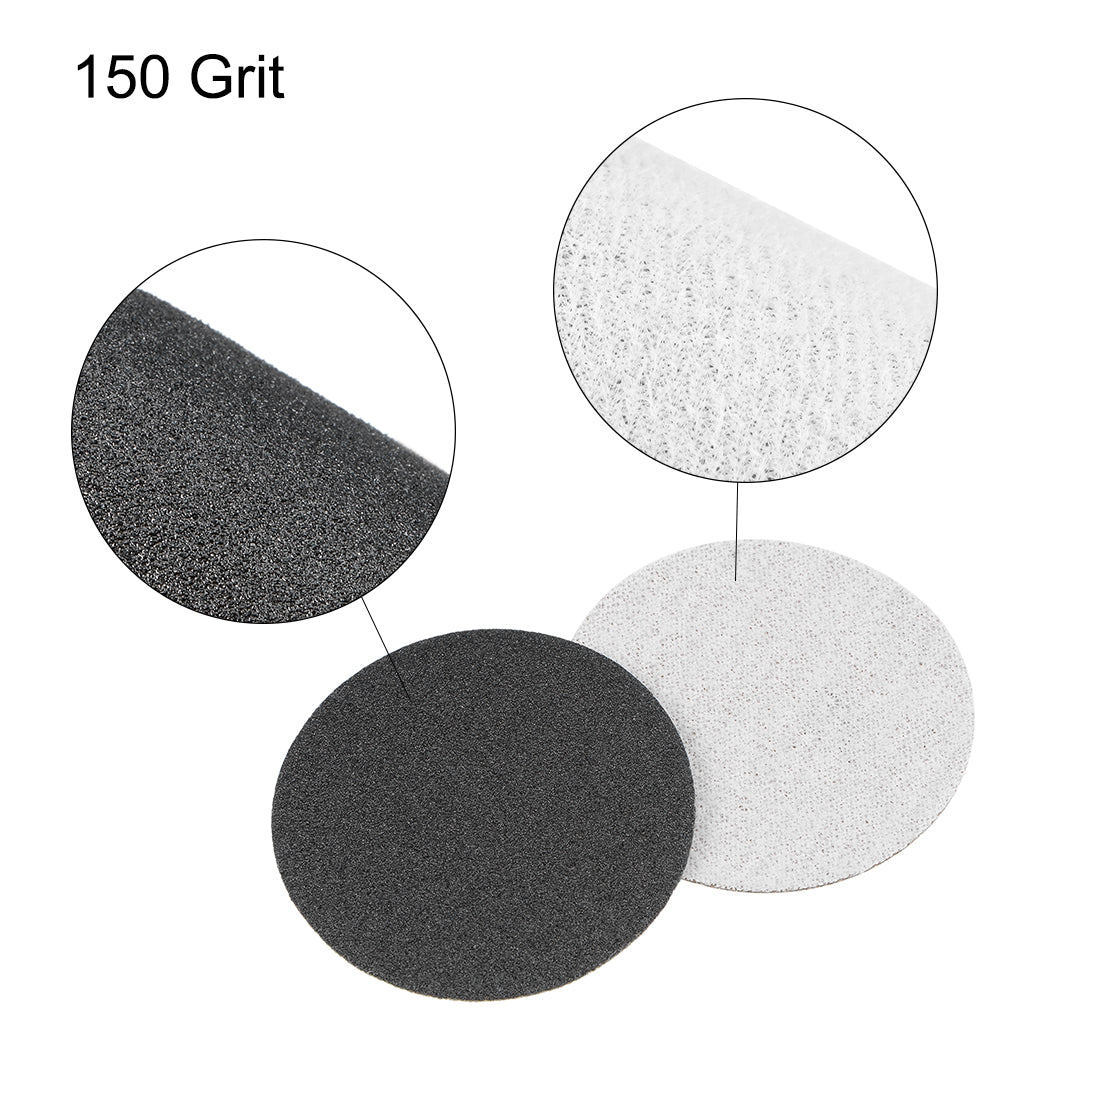 Uxcell Uxcell 2-Inch Hook and Loop Sanding Disc Wet / Dry Silicon Carbide 2000 Grit 100 Pcs